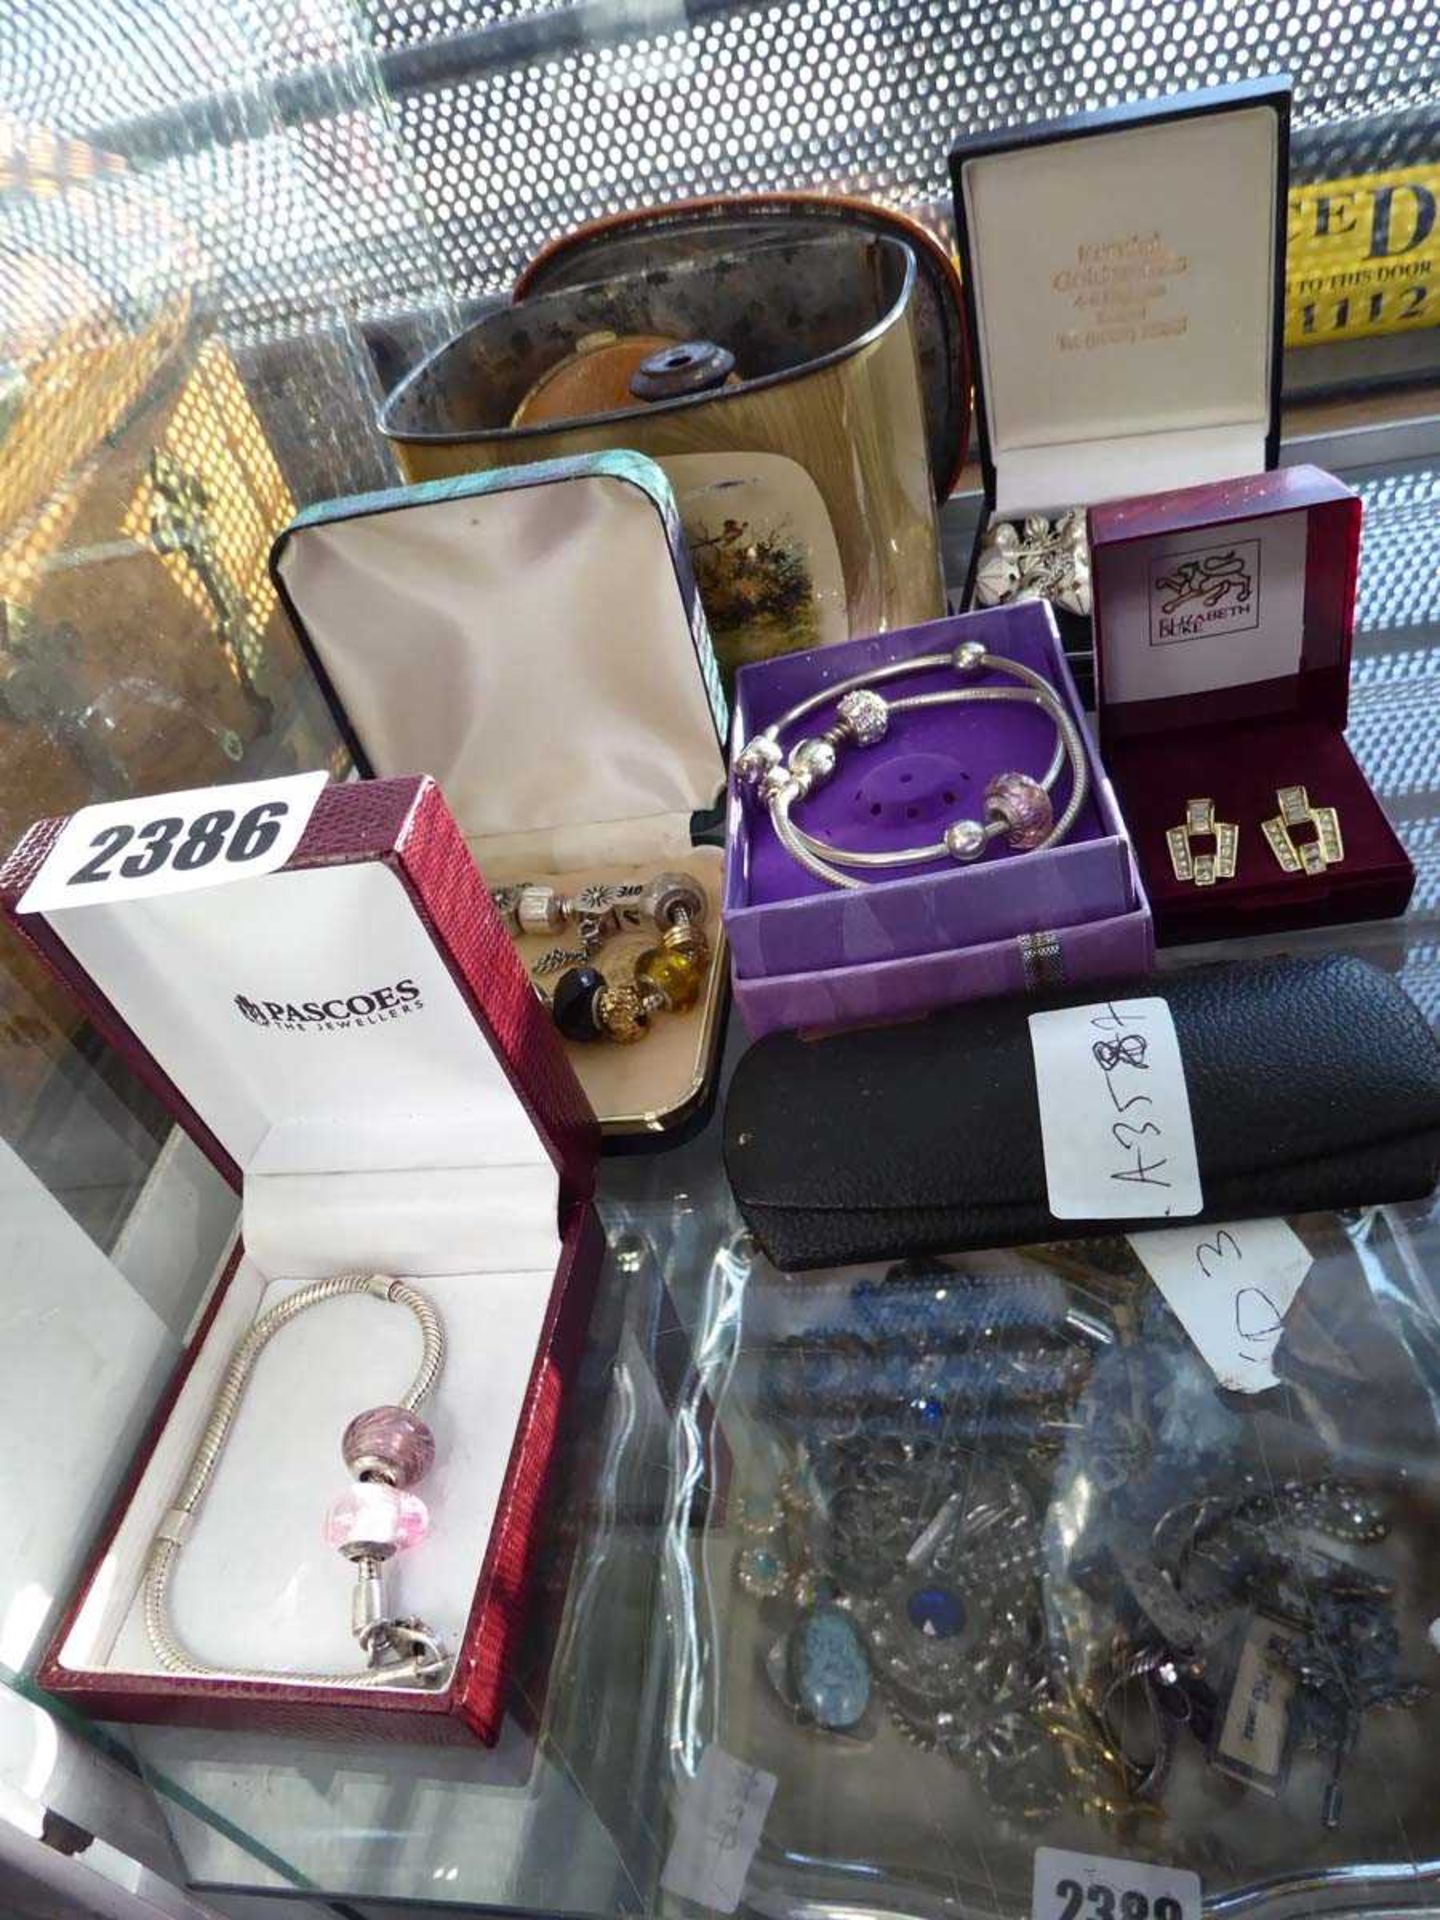 Small selection of charm bracelet and other jewellery items, earrings etc